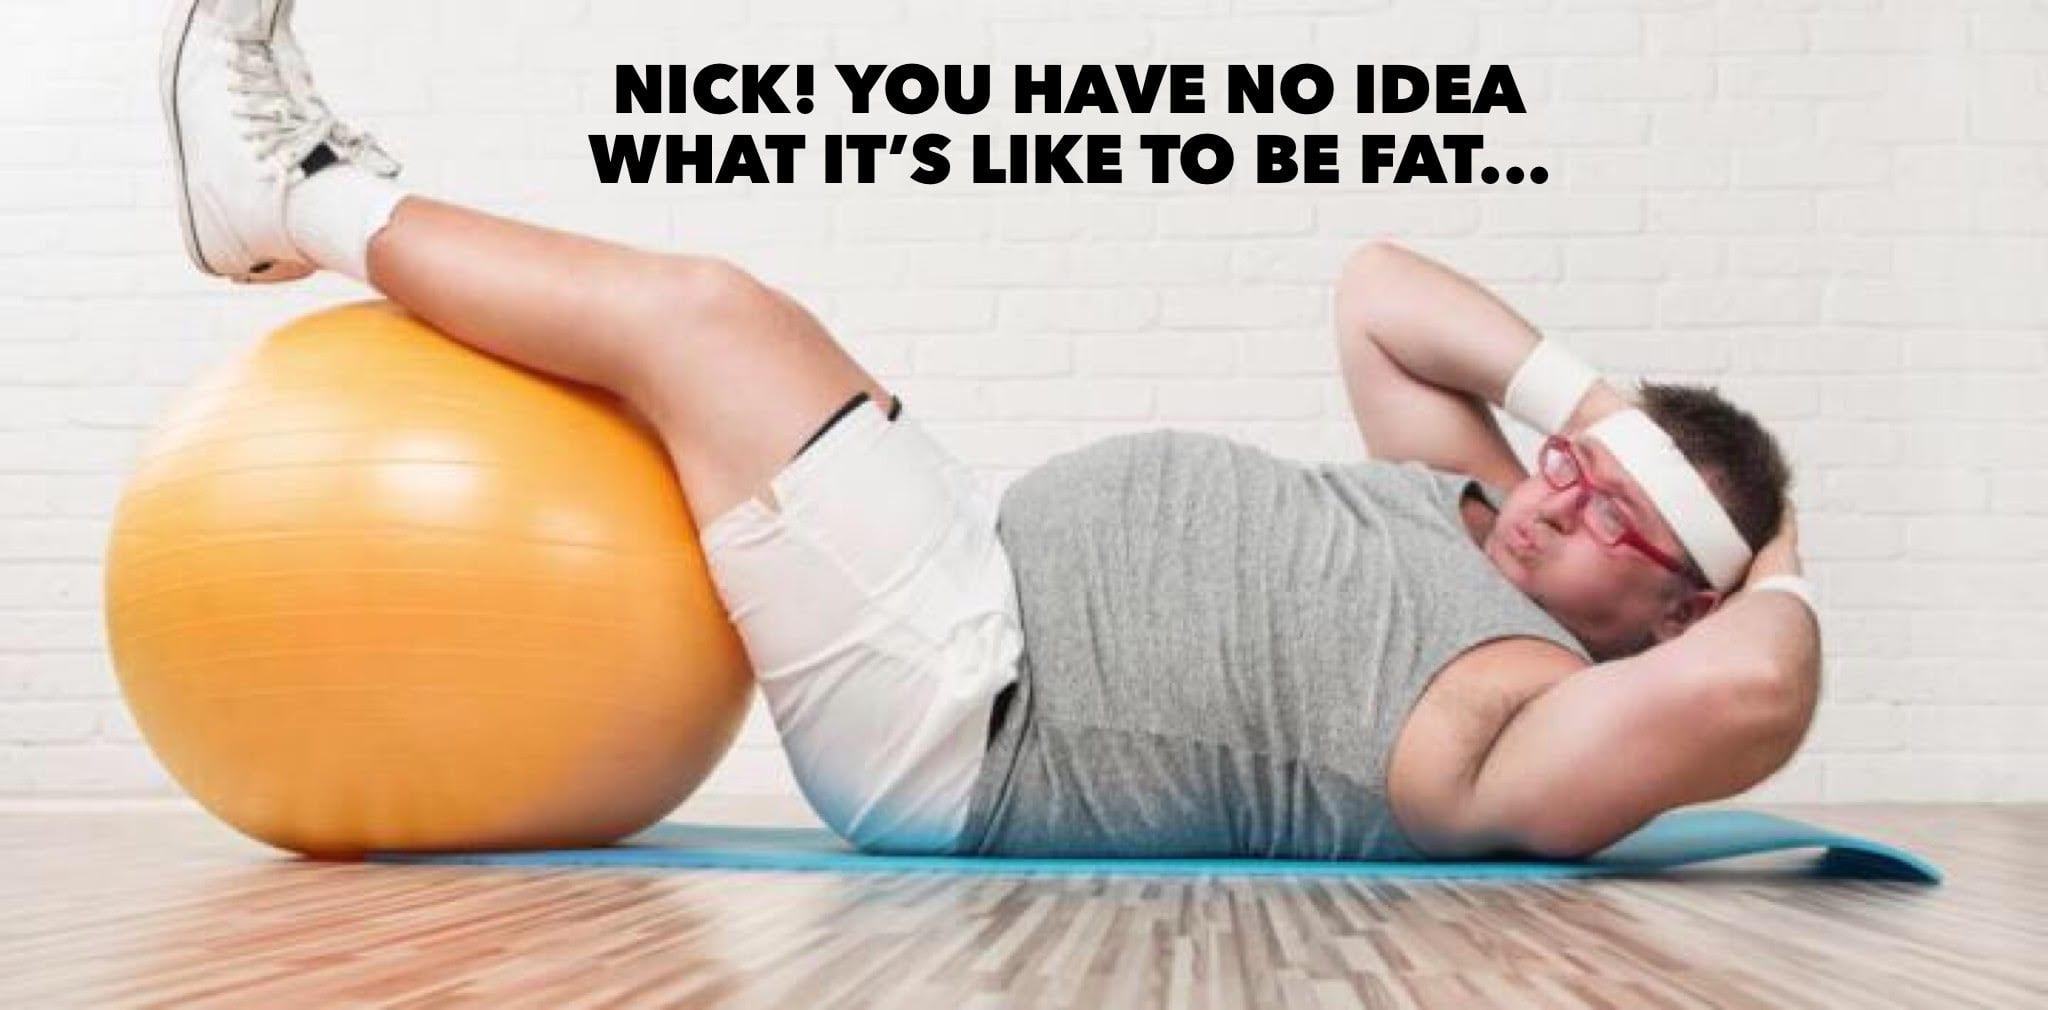 Nick! You Have No Idea What It's Like To Be Fat!